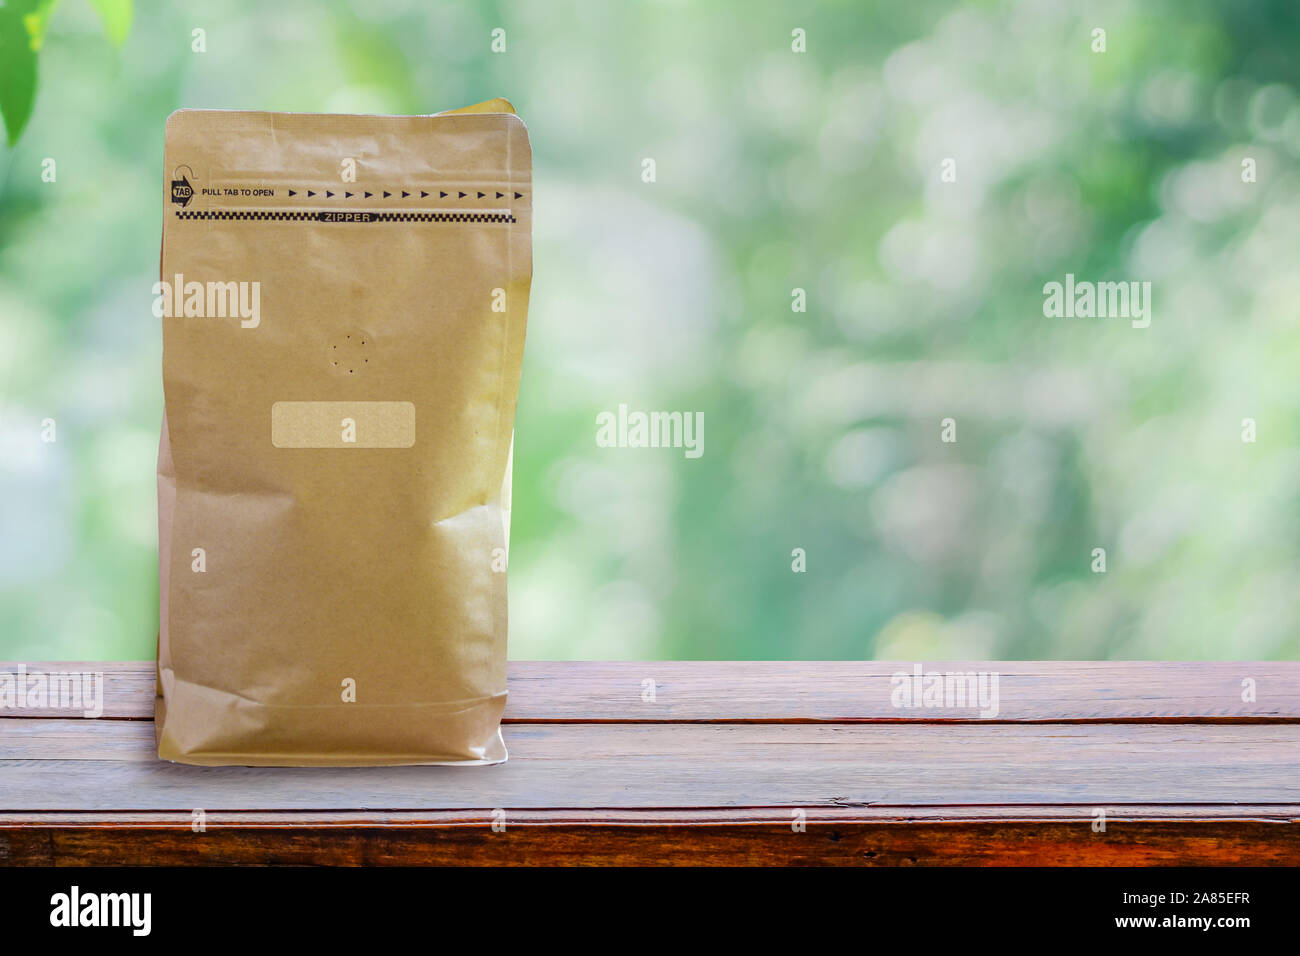 Paper packaging smelling hole, Coffee bean packaging smell the flavor of coffee wafting on wooden table with Clipping path on paper bag and label Stock Photo